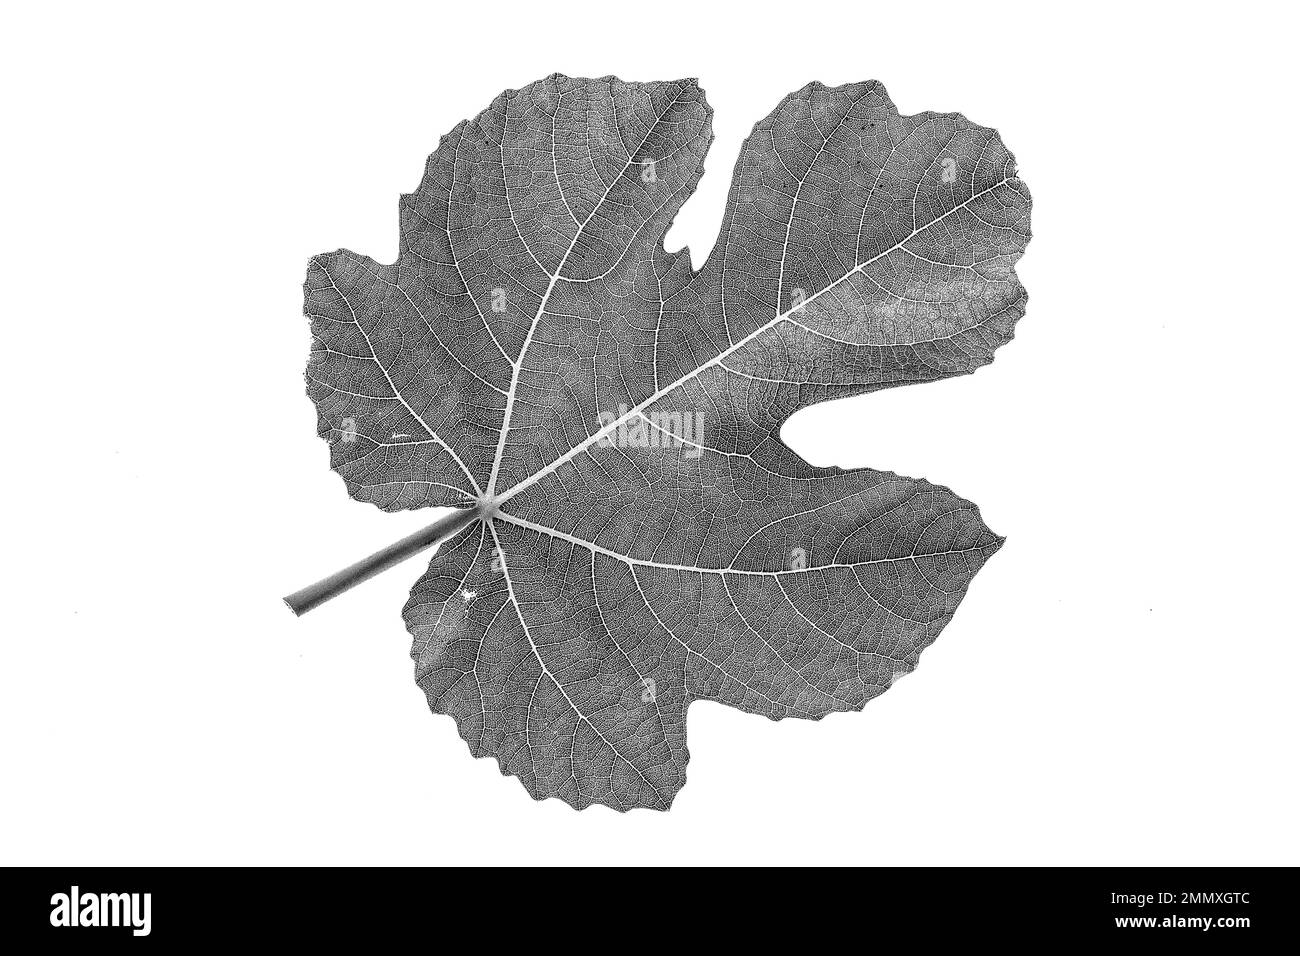 A black and white close up of a single fig leaf against a white background. Stock Photo